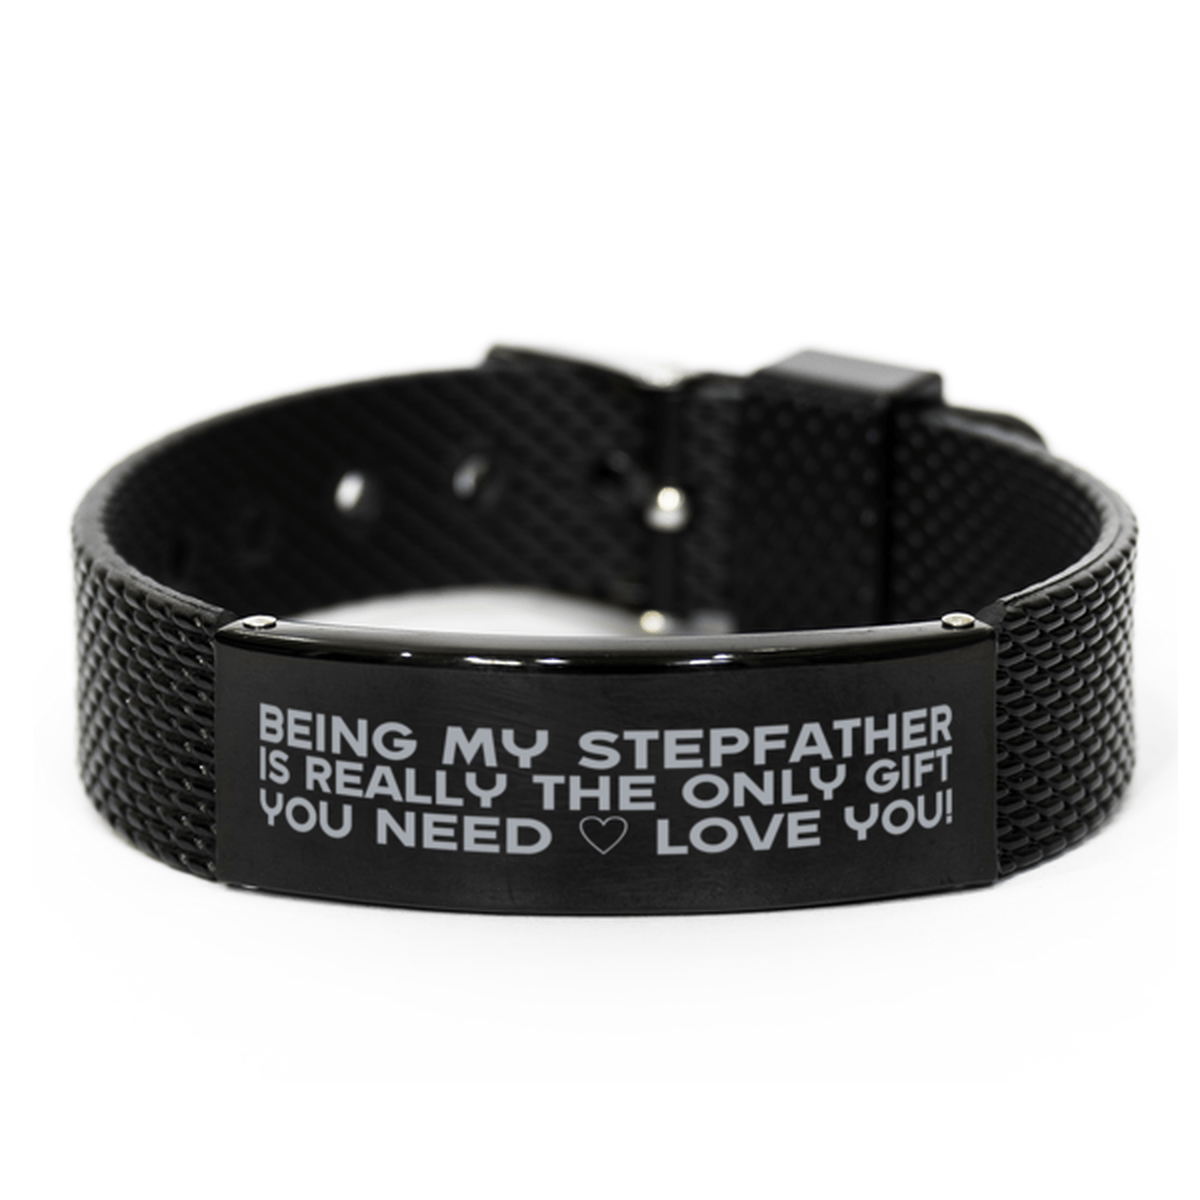 Funny Stepfather Black Shark Mesh Bracelet, Being My Stepfather Is Really the Only Gift You Need, Best Birthday Gifts for Stepfather